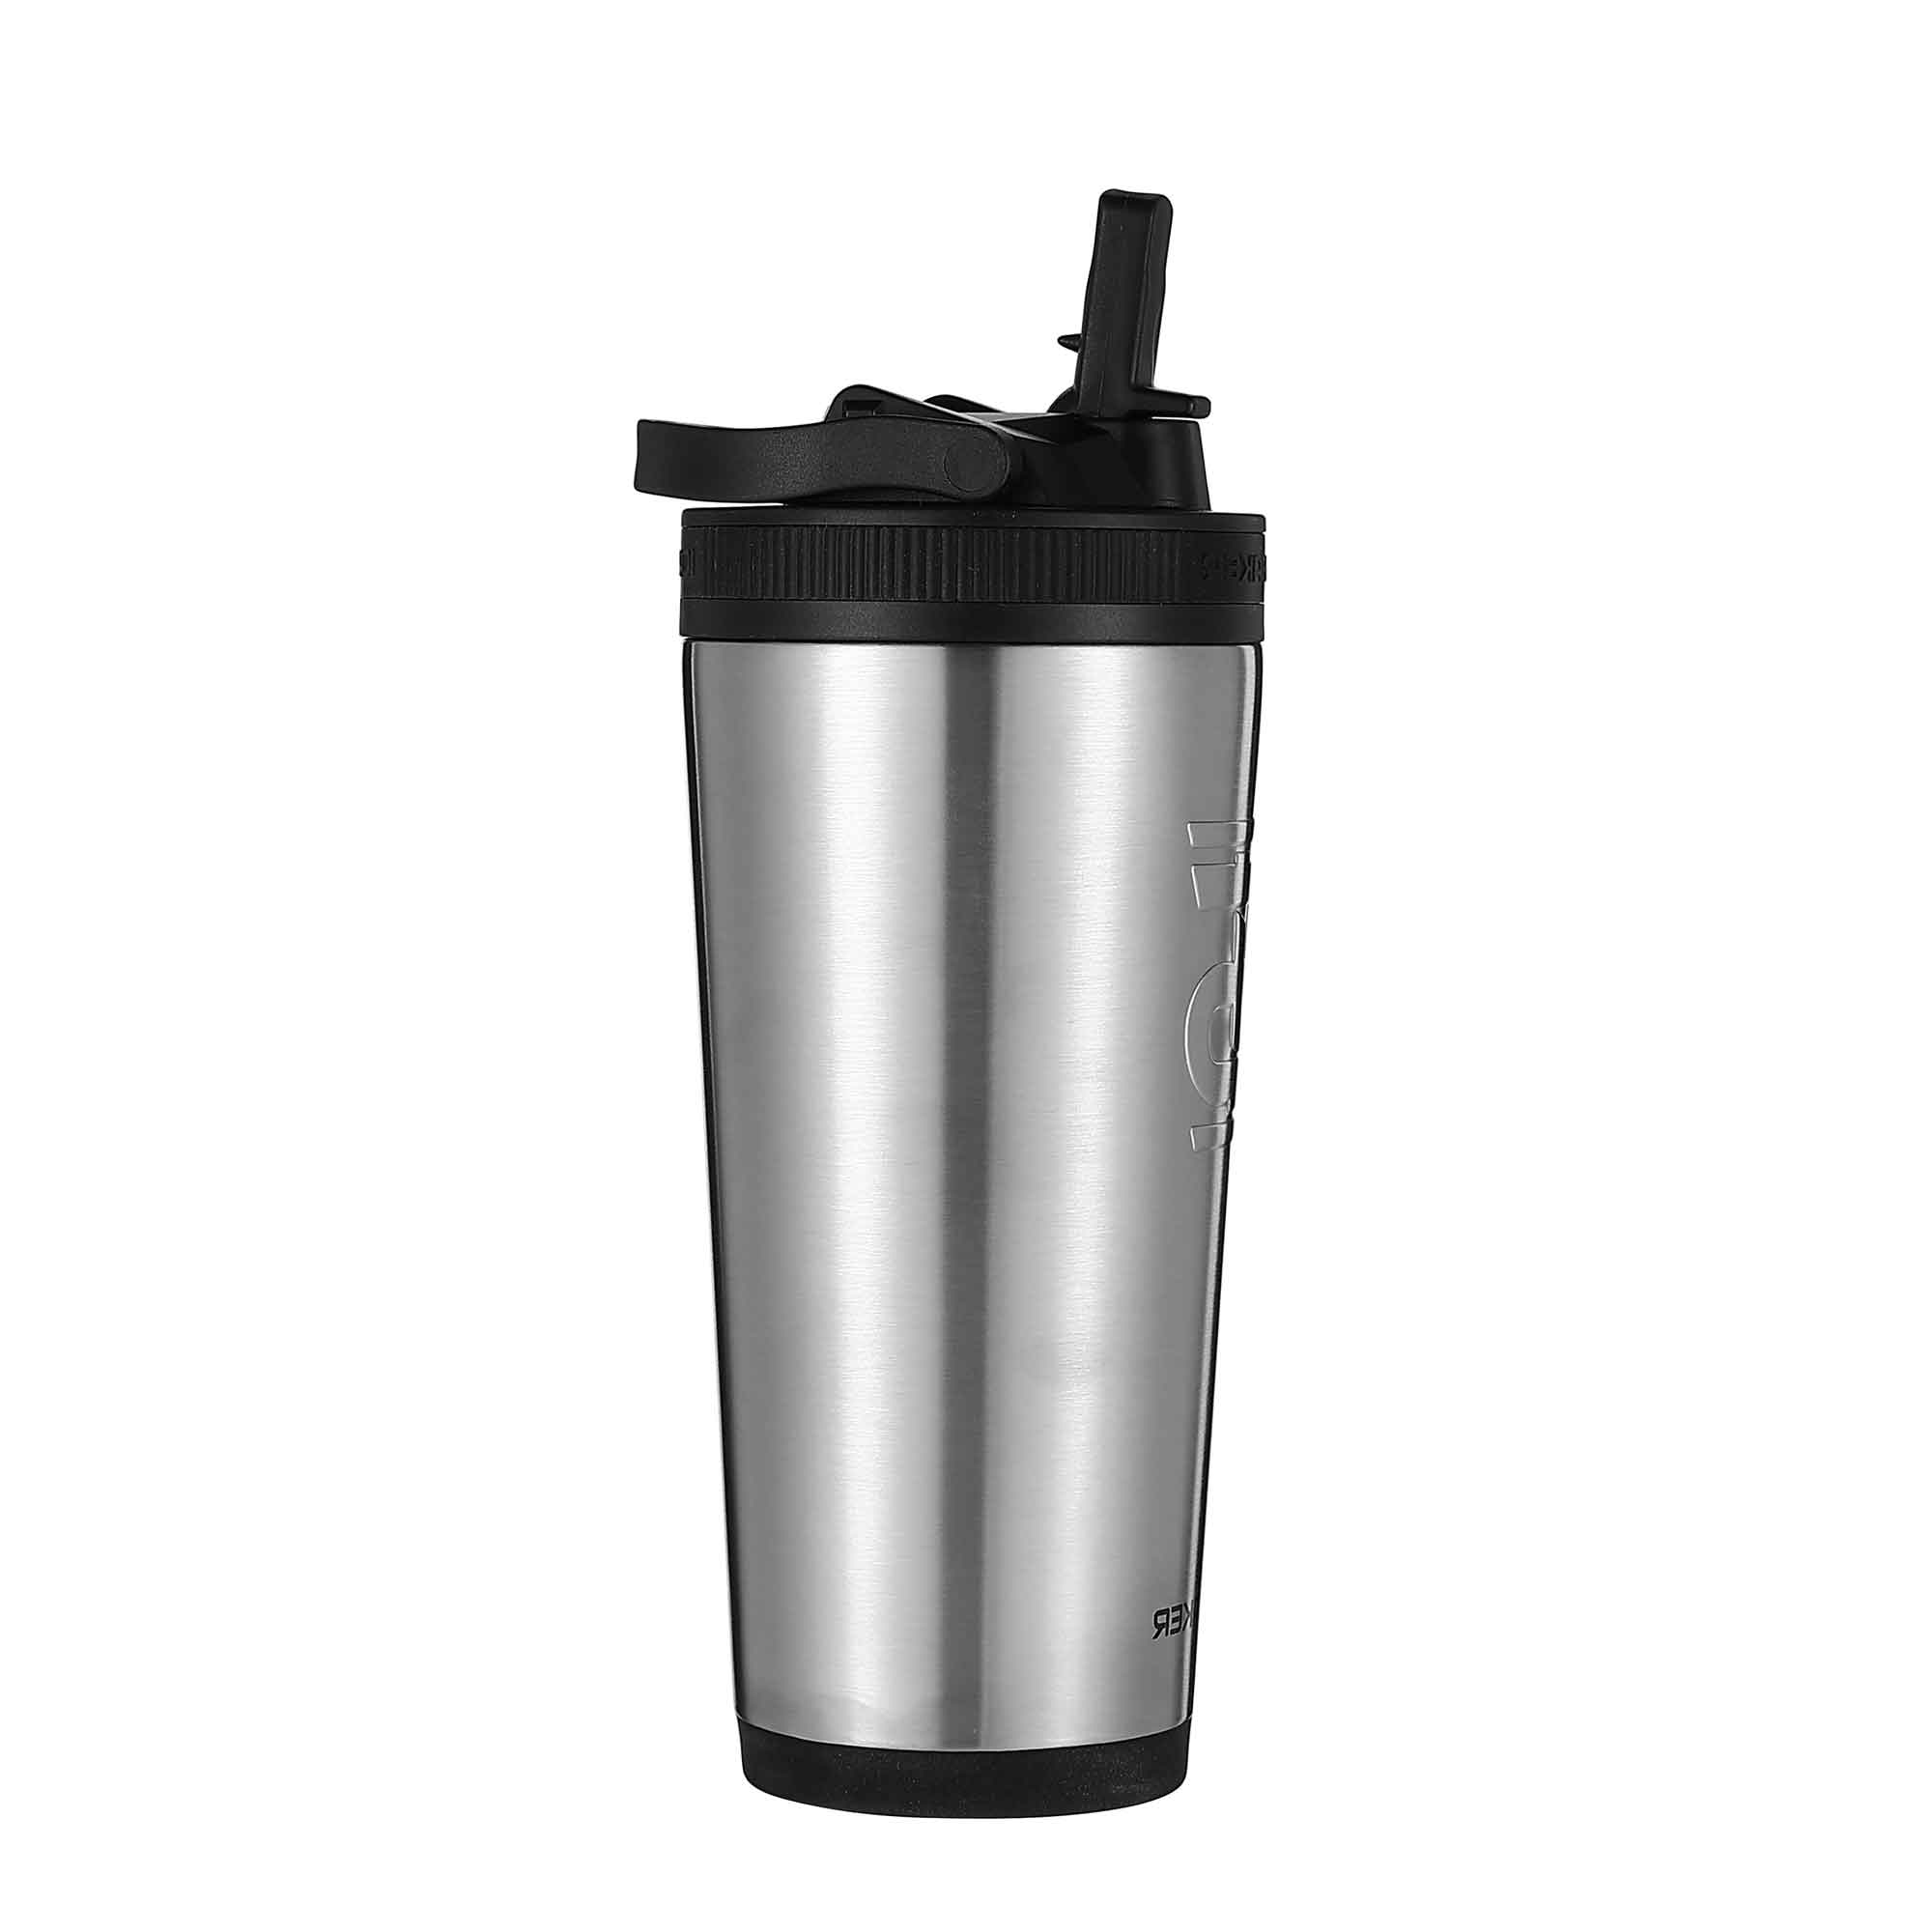 750ml Cocktail Shaker,Shaker Cup Stainless Steel Water Bottle,Shaker  Bottles For Protein Mixes,BPAFr…See more 750ml Cocktail Shaker,Shaker Cup